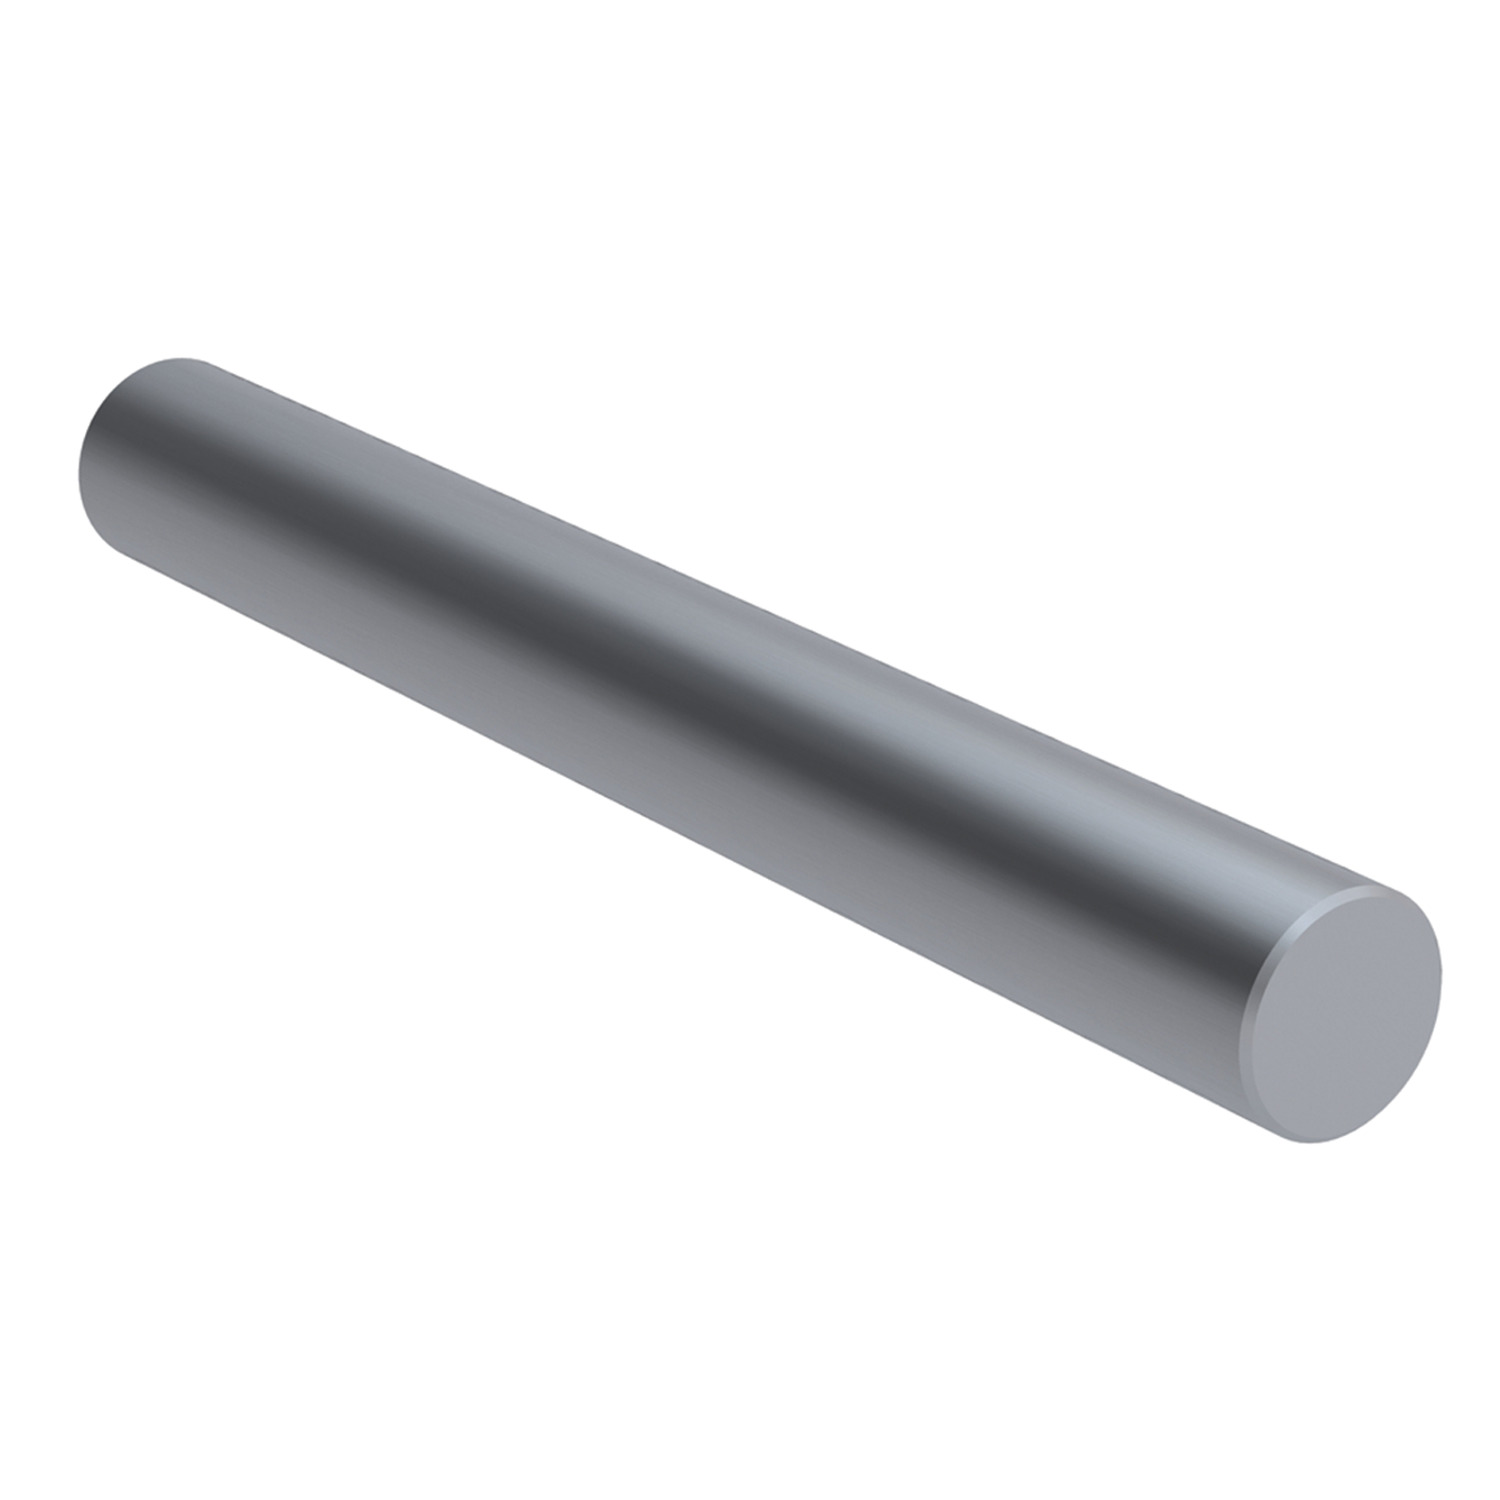 Hard Stainless Linear Shafts Hard stainless steel linear shafts for use with linear bearings.